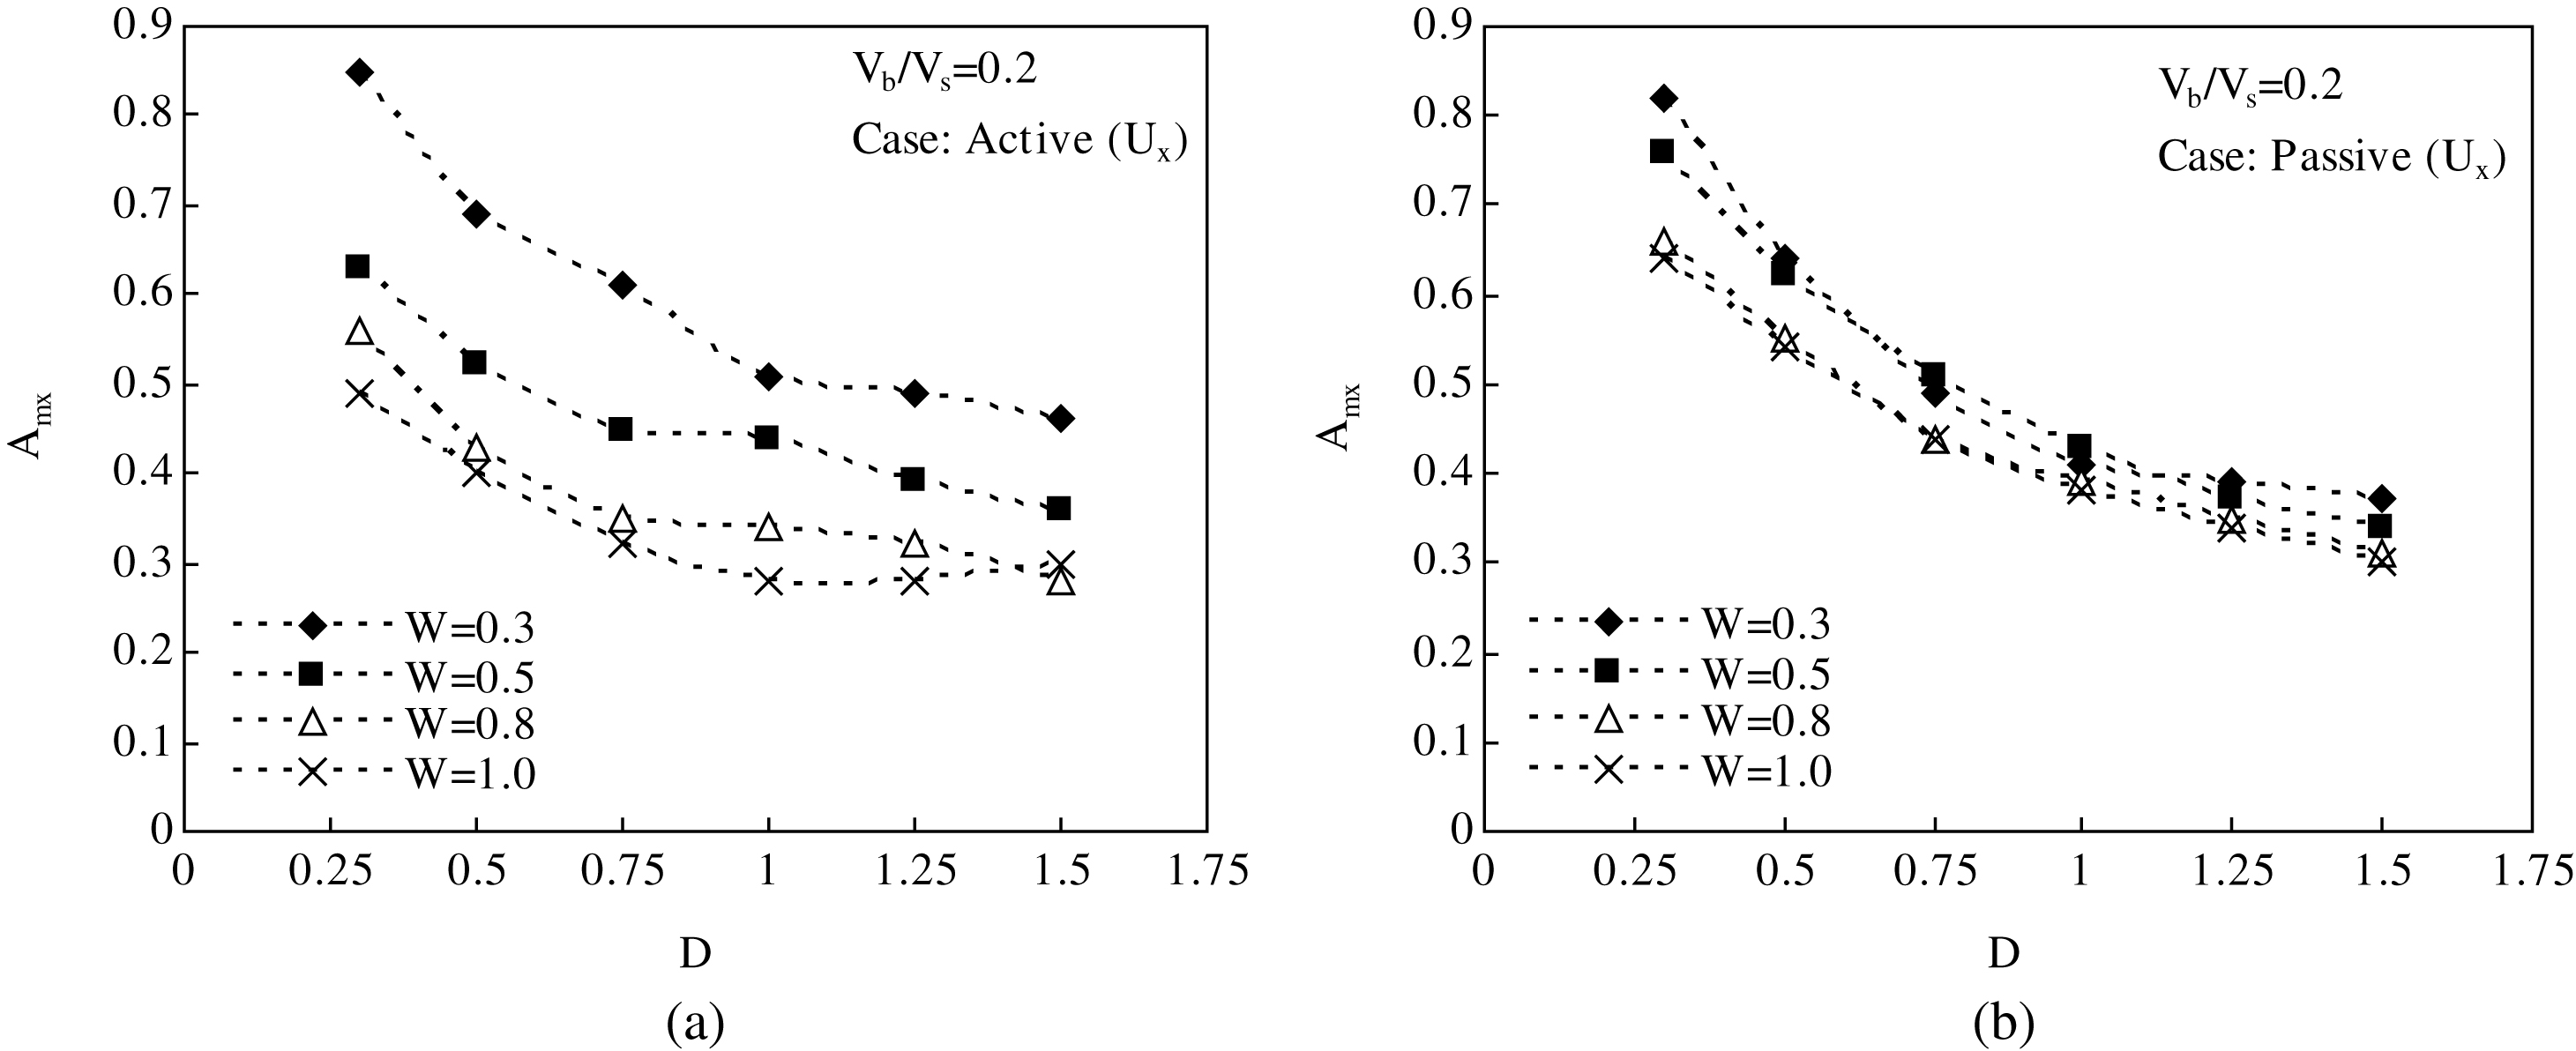 Effect of depth and width on reducing horizontal vibration in (a) active case (b) passive case.